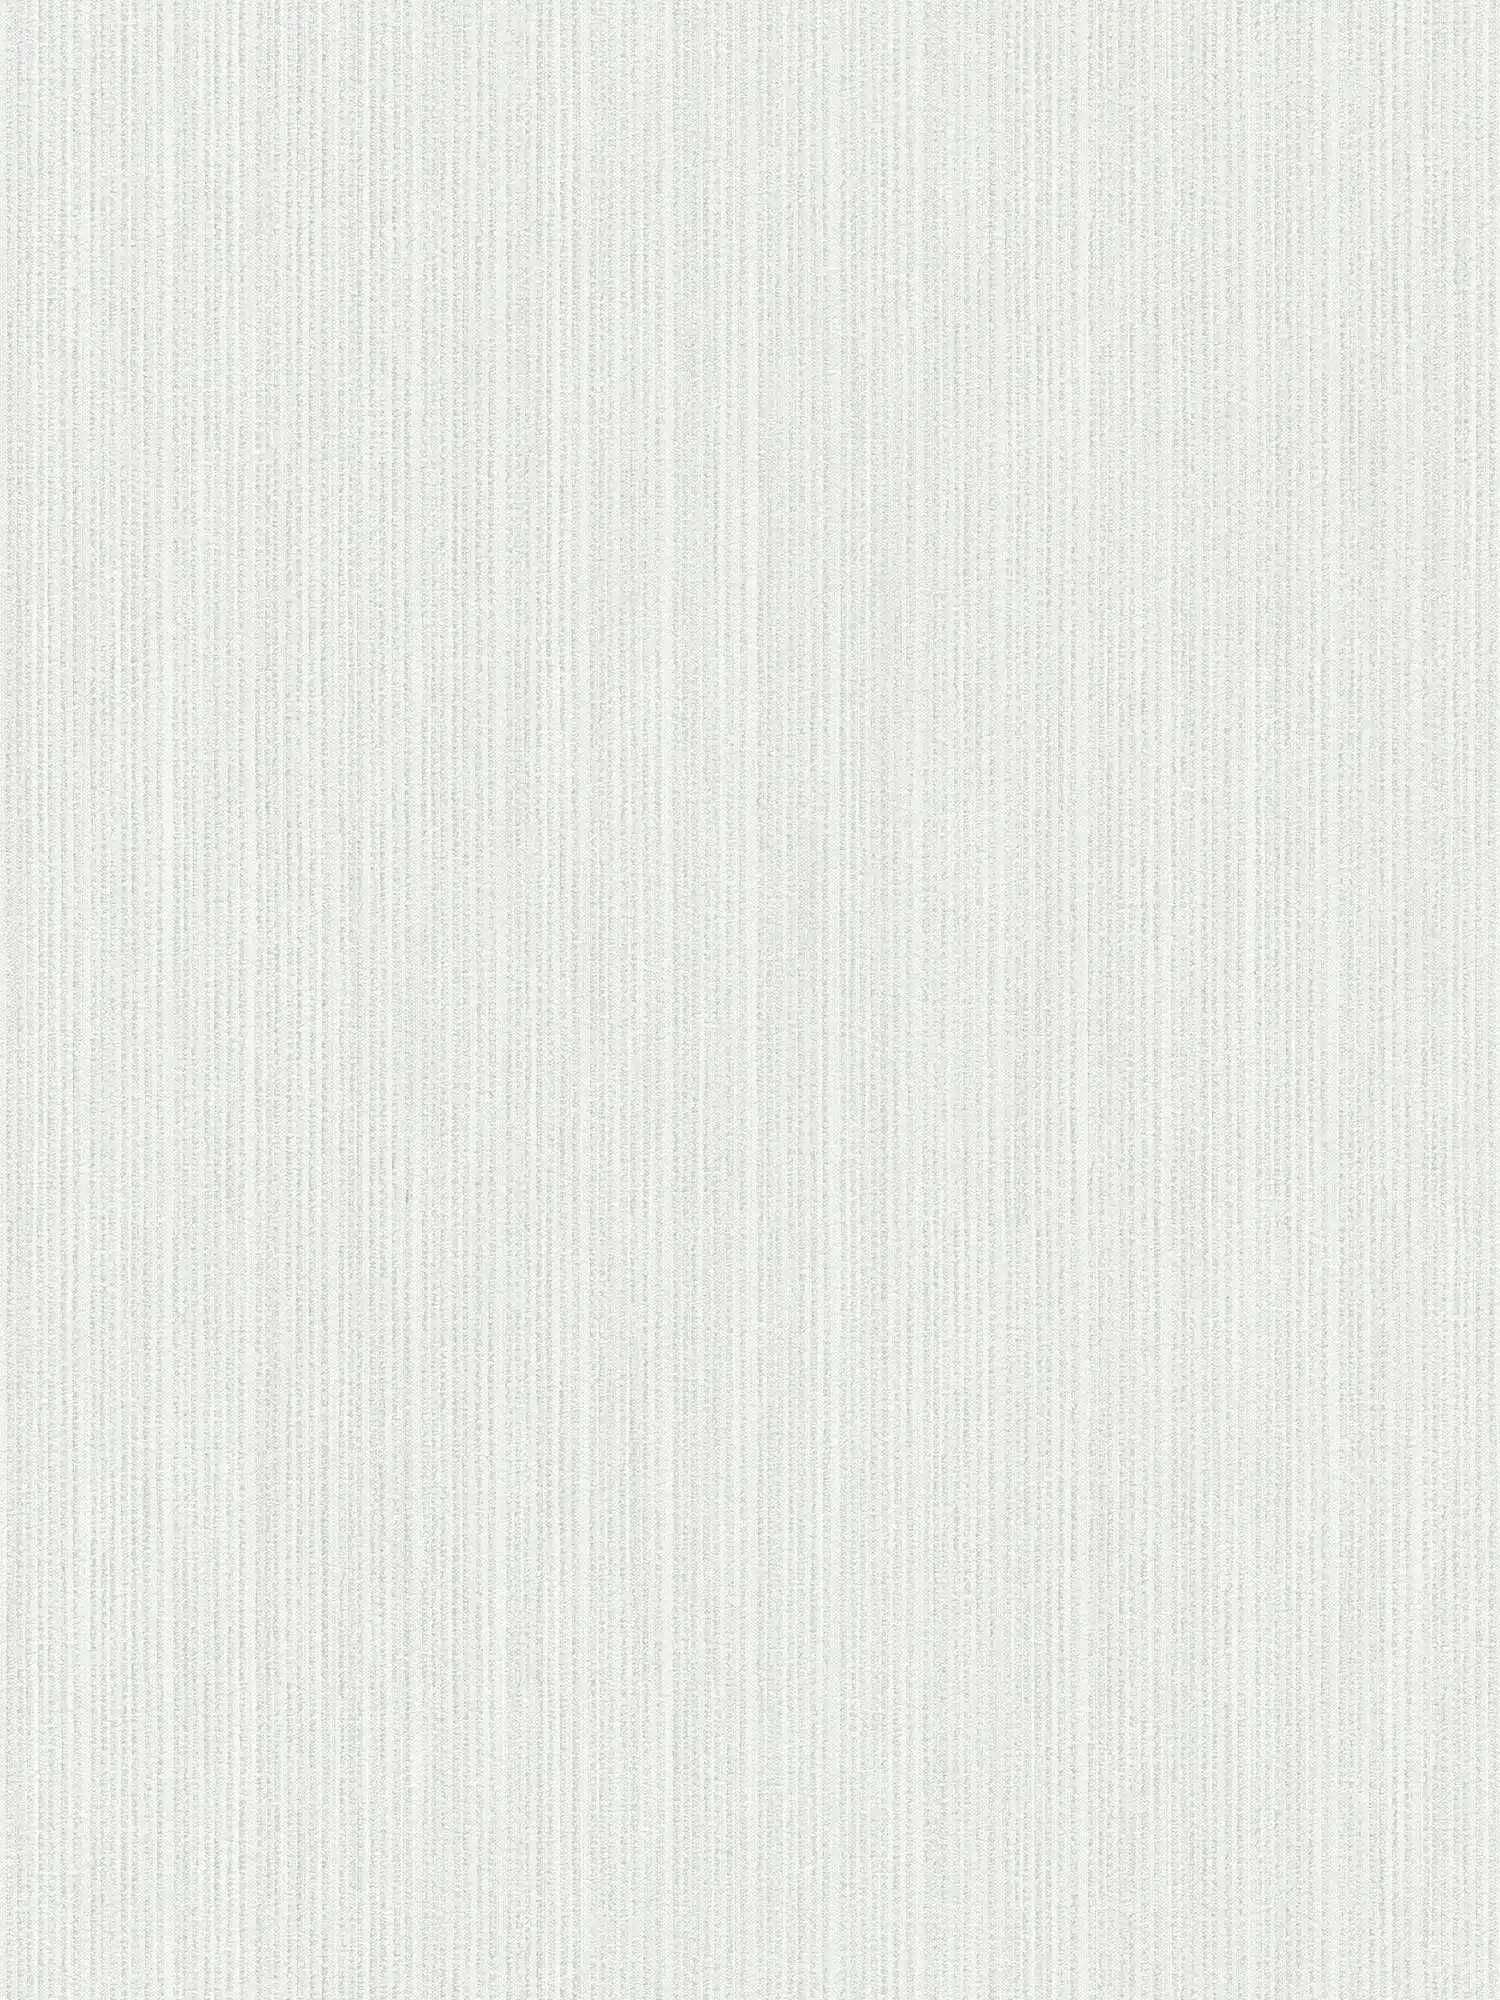 Plain wallpaper with lined structure pattern - cream
